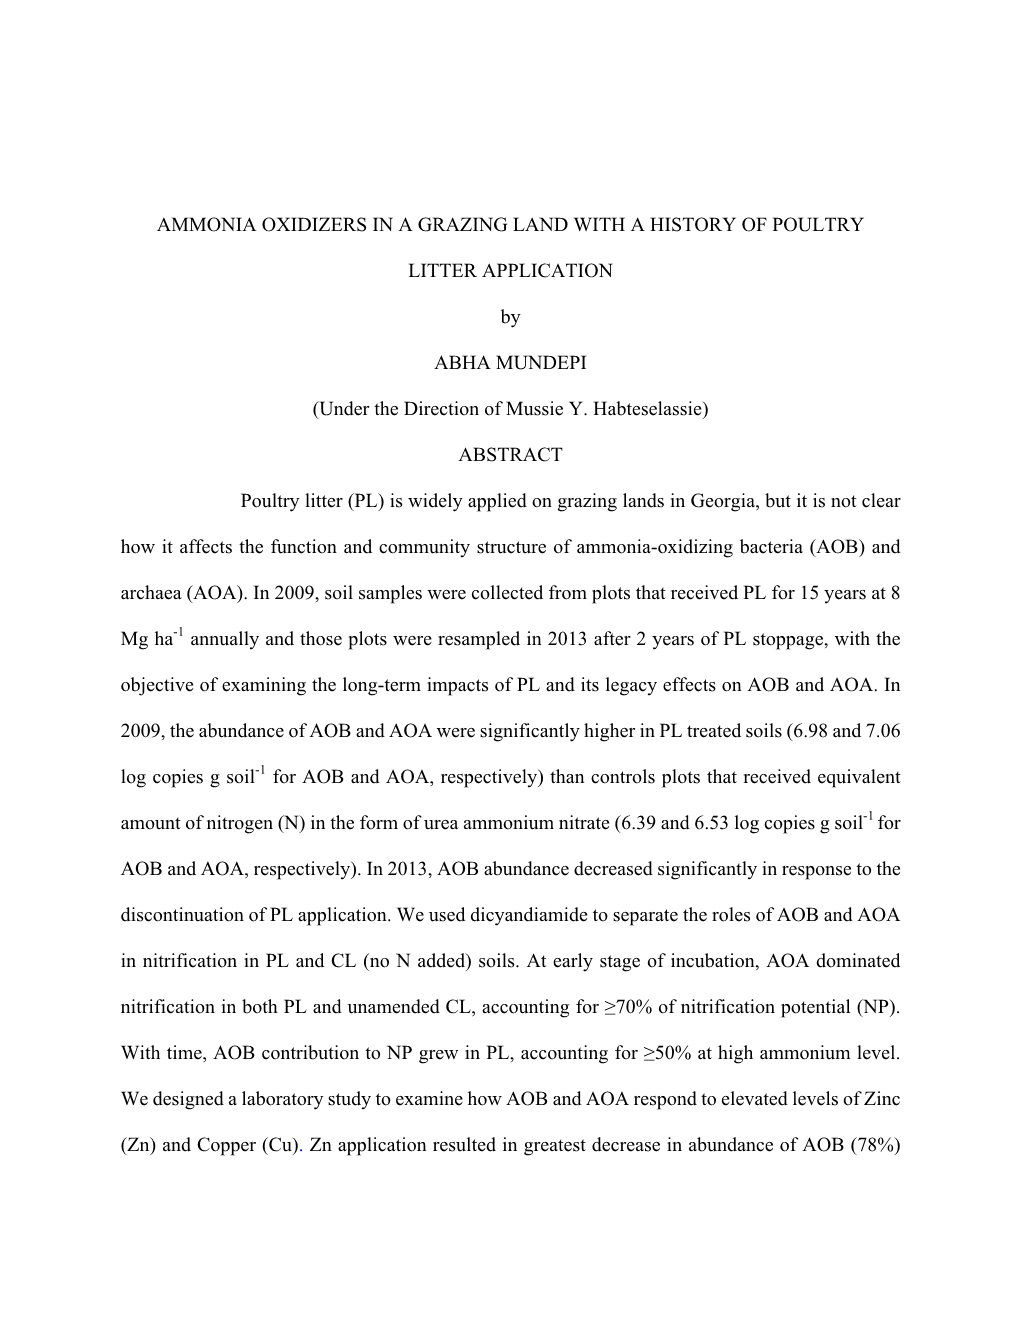 Ammonia Oxidizers in a Grazing Land with a History of Poultry